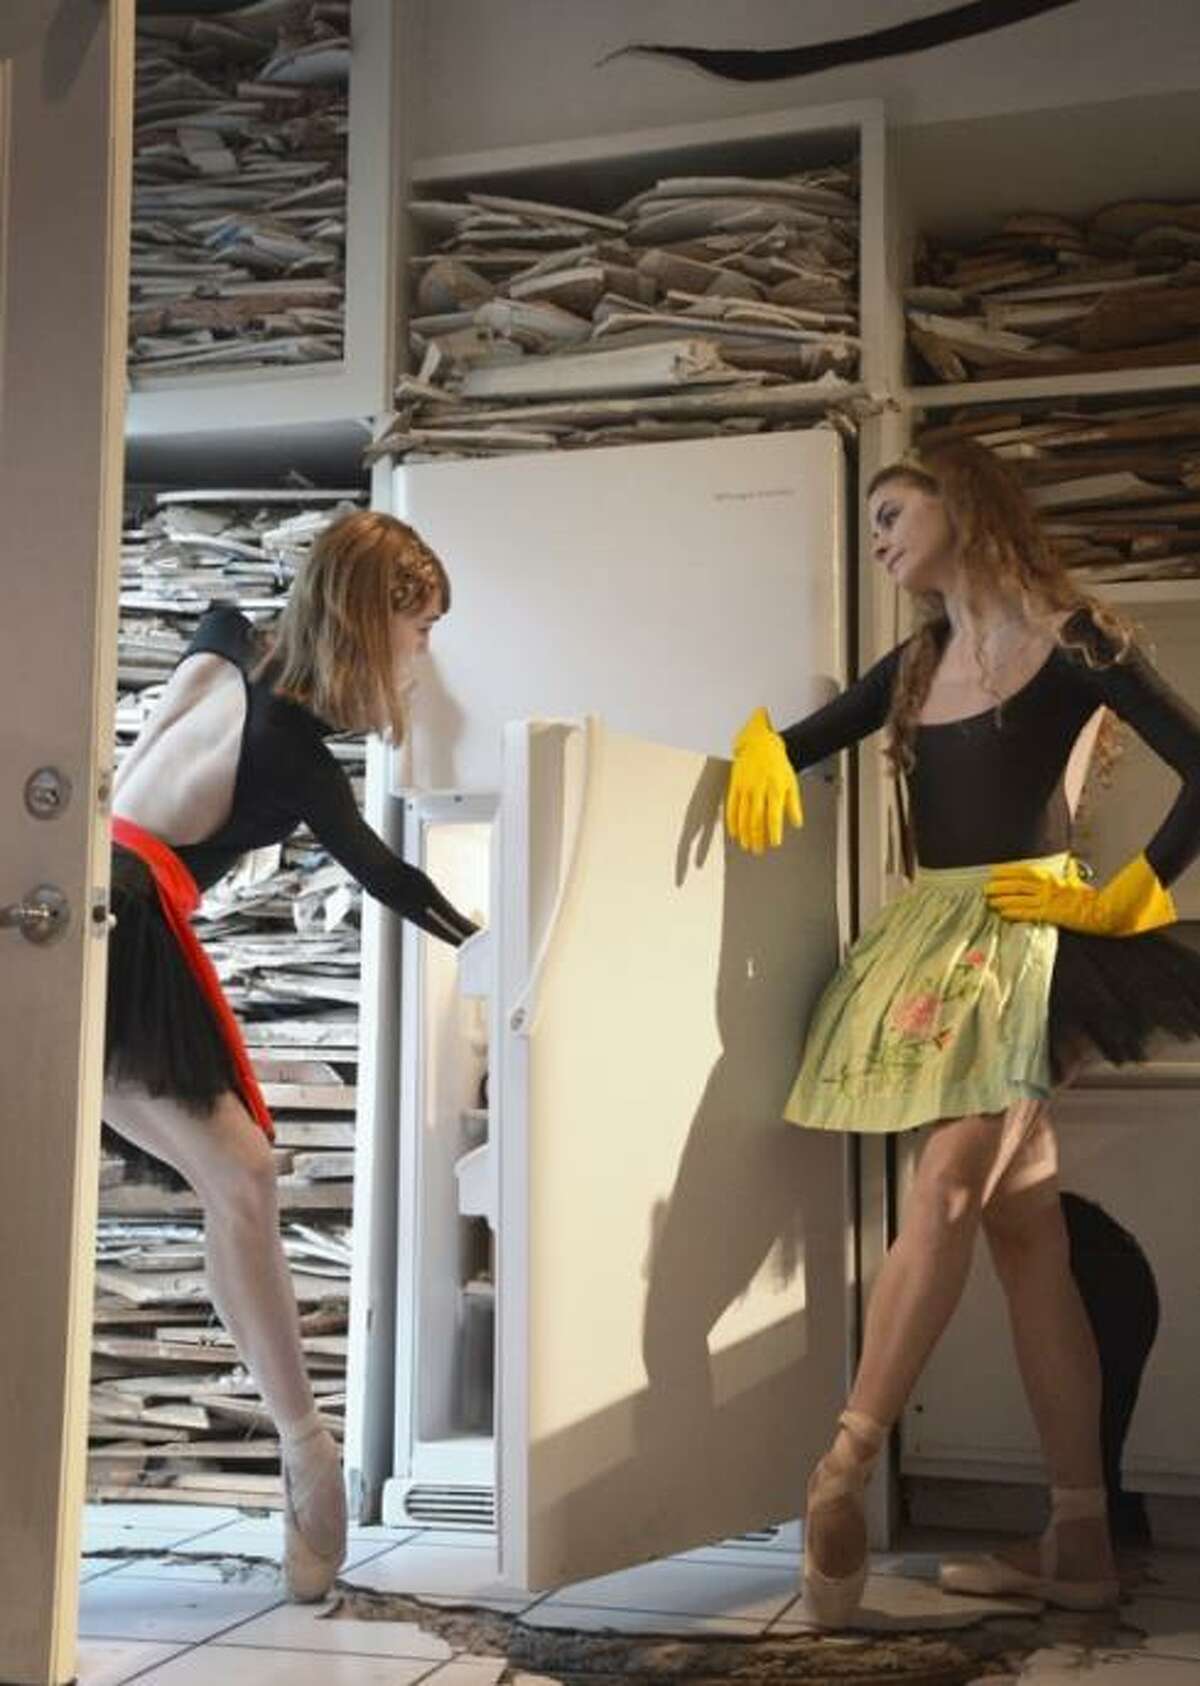 Houston Ballet’s Jacquelyn Long, left, and Natalie Varnum guest star in Hope Stone Dance’s “Honey, I’m Home” Sunday afternoon within Havel Ruck Projects’ immersive sculpture house “Ripple.”